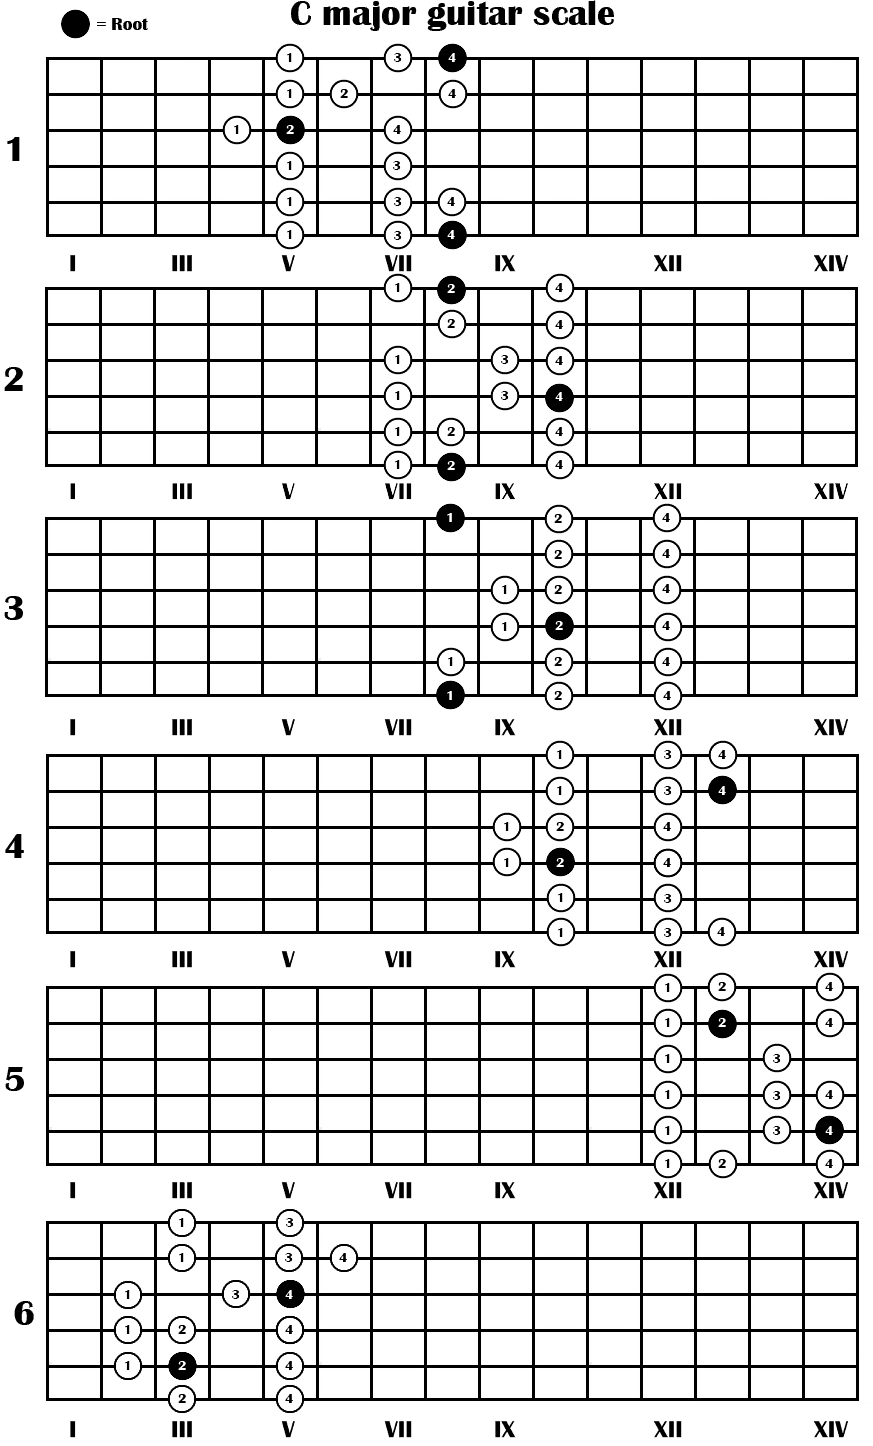 major-scale-guitar_positions.gif